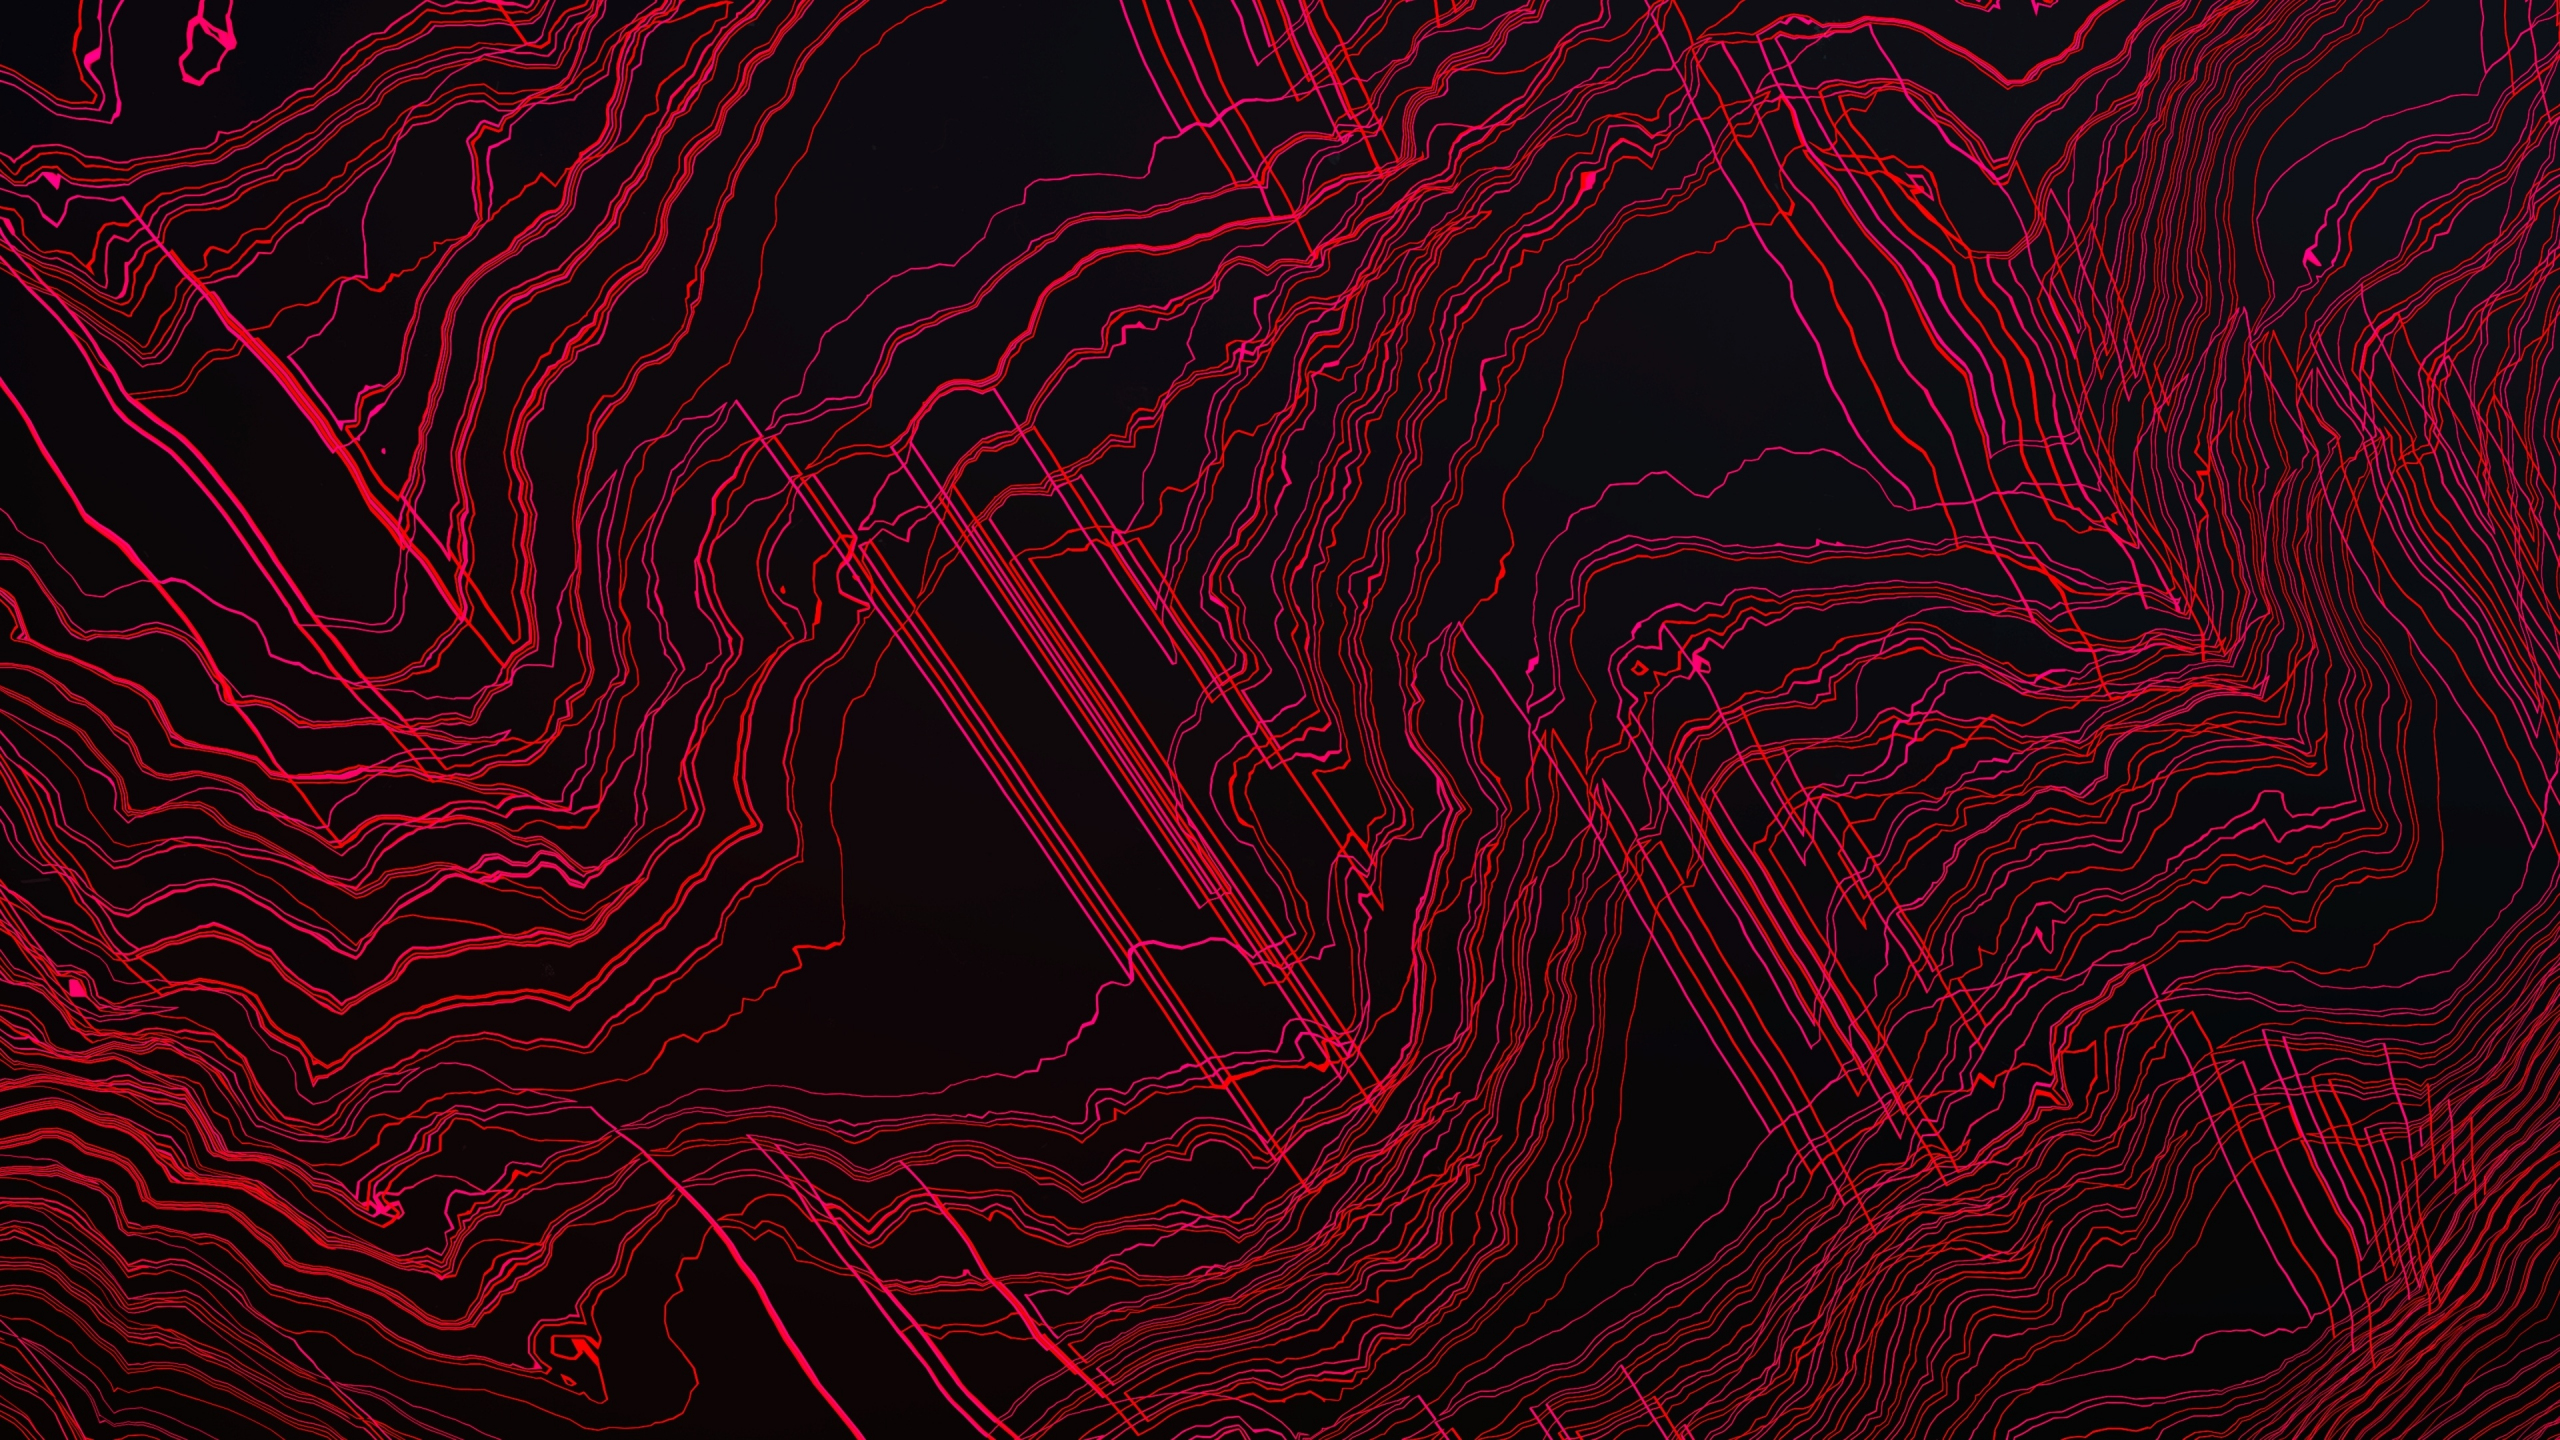 Download 2560x1440 Wallpaper Glitch Art Lines Curvy Abstract Dual Wide Widescreen 16 9 Widescreen 2560x1440 Hd Image Background 9044